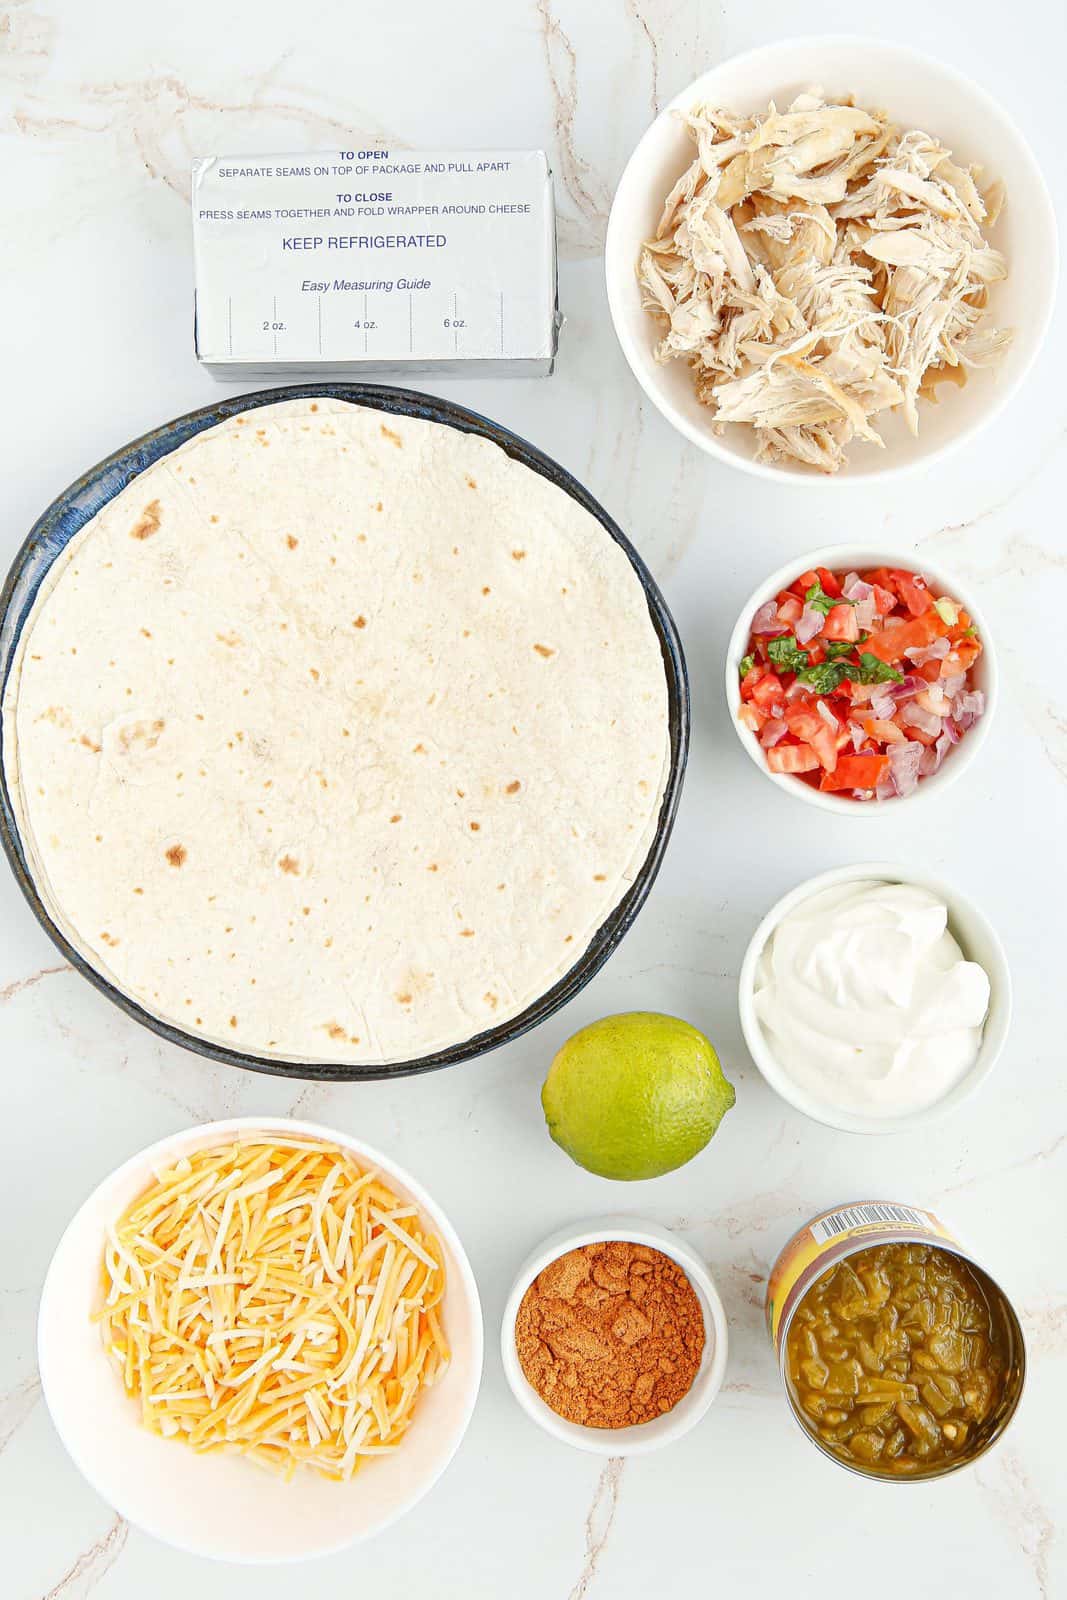 Ingredients needed: chicken, cream cheese, green chiles, taco seasoning, mexican cheese, tortillas and optional toppings.